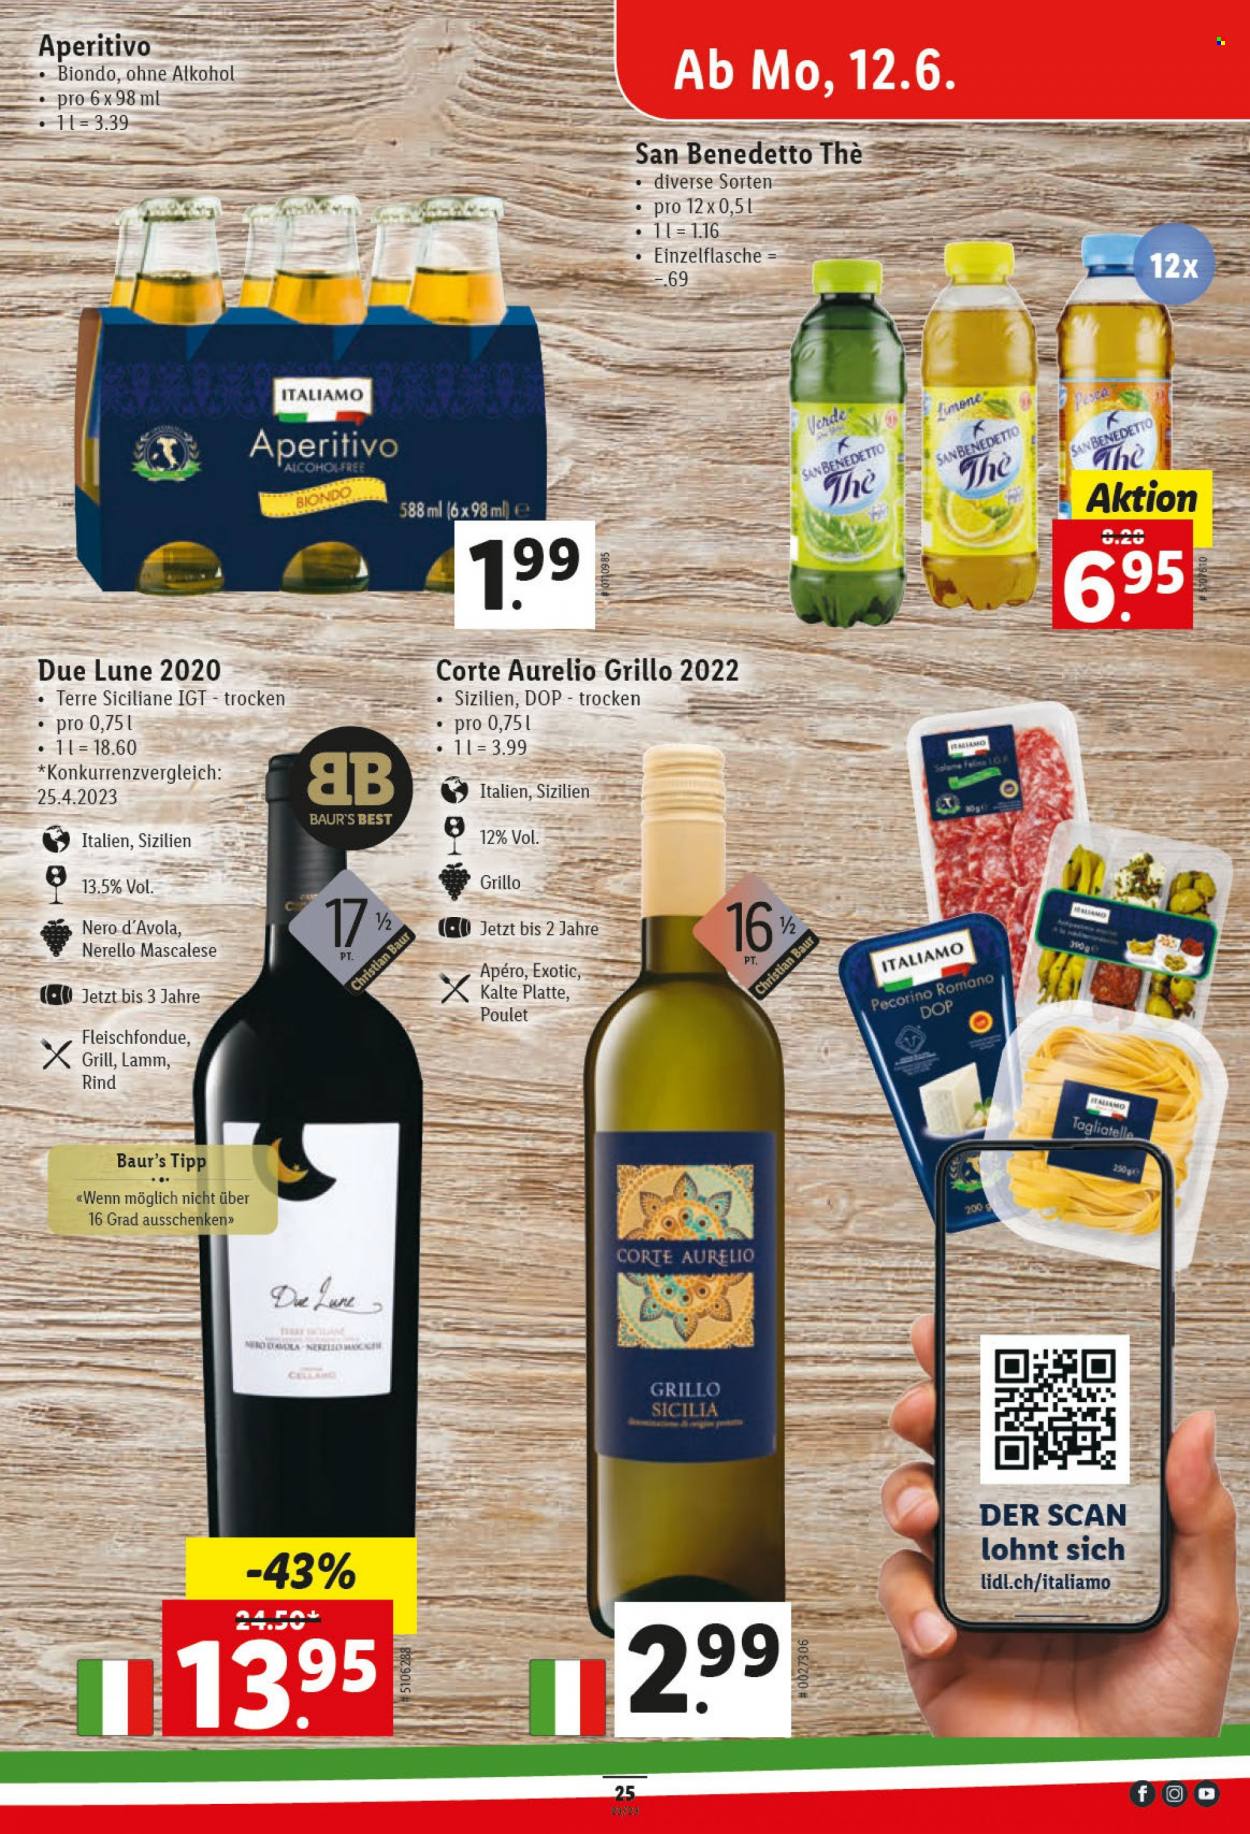 Catalogue Lidl - 8.6.2023 - 14.6.2023. Page 25.